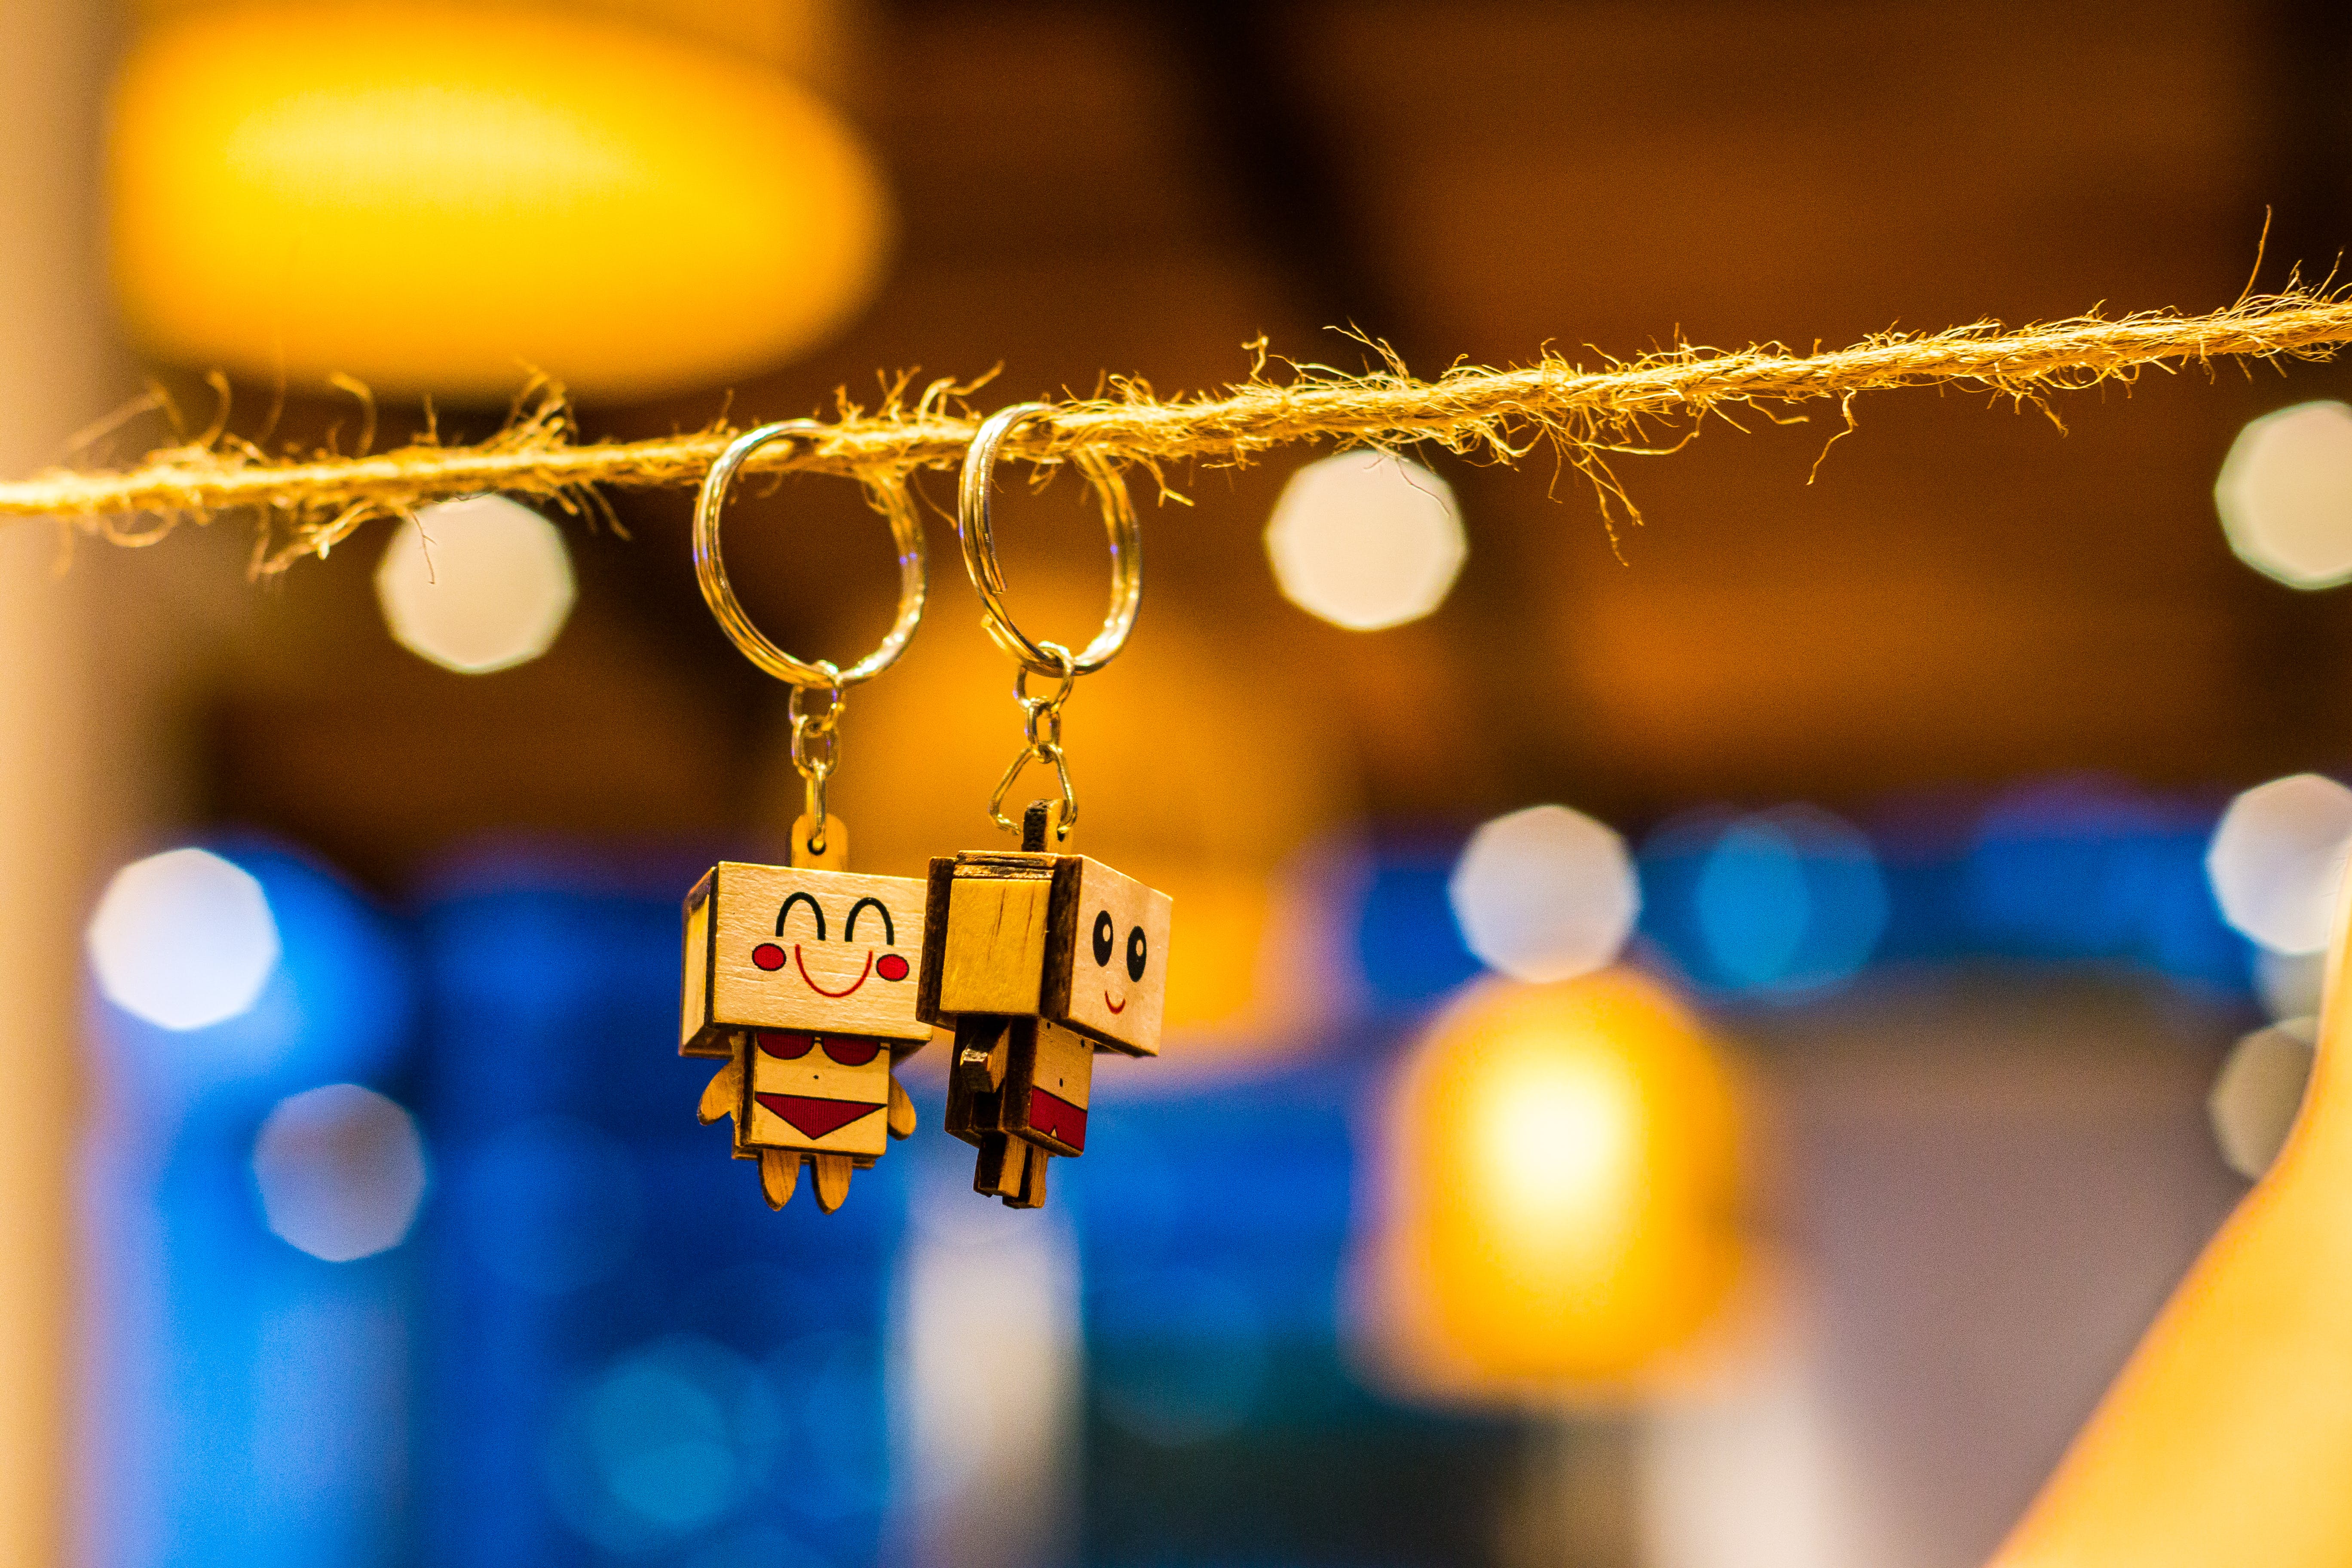 A matching pair of keychains hangs on a line